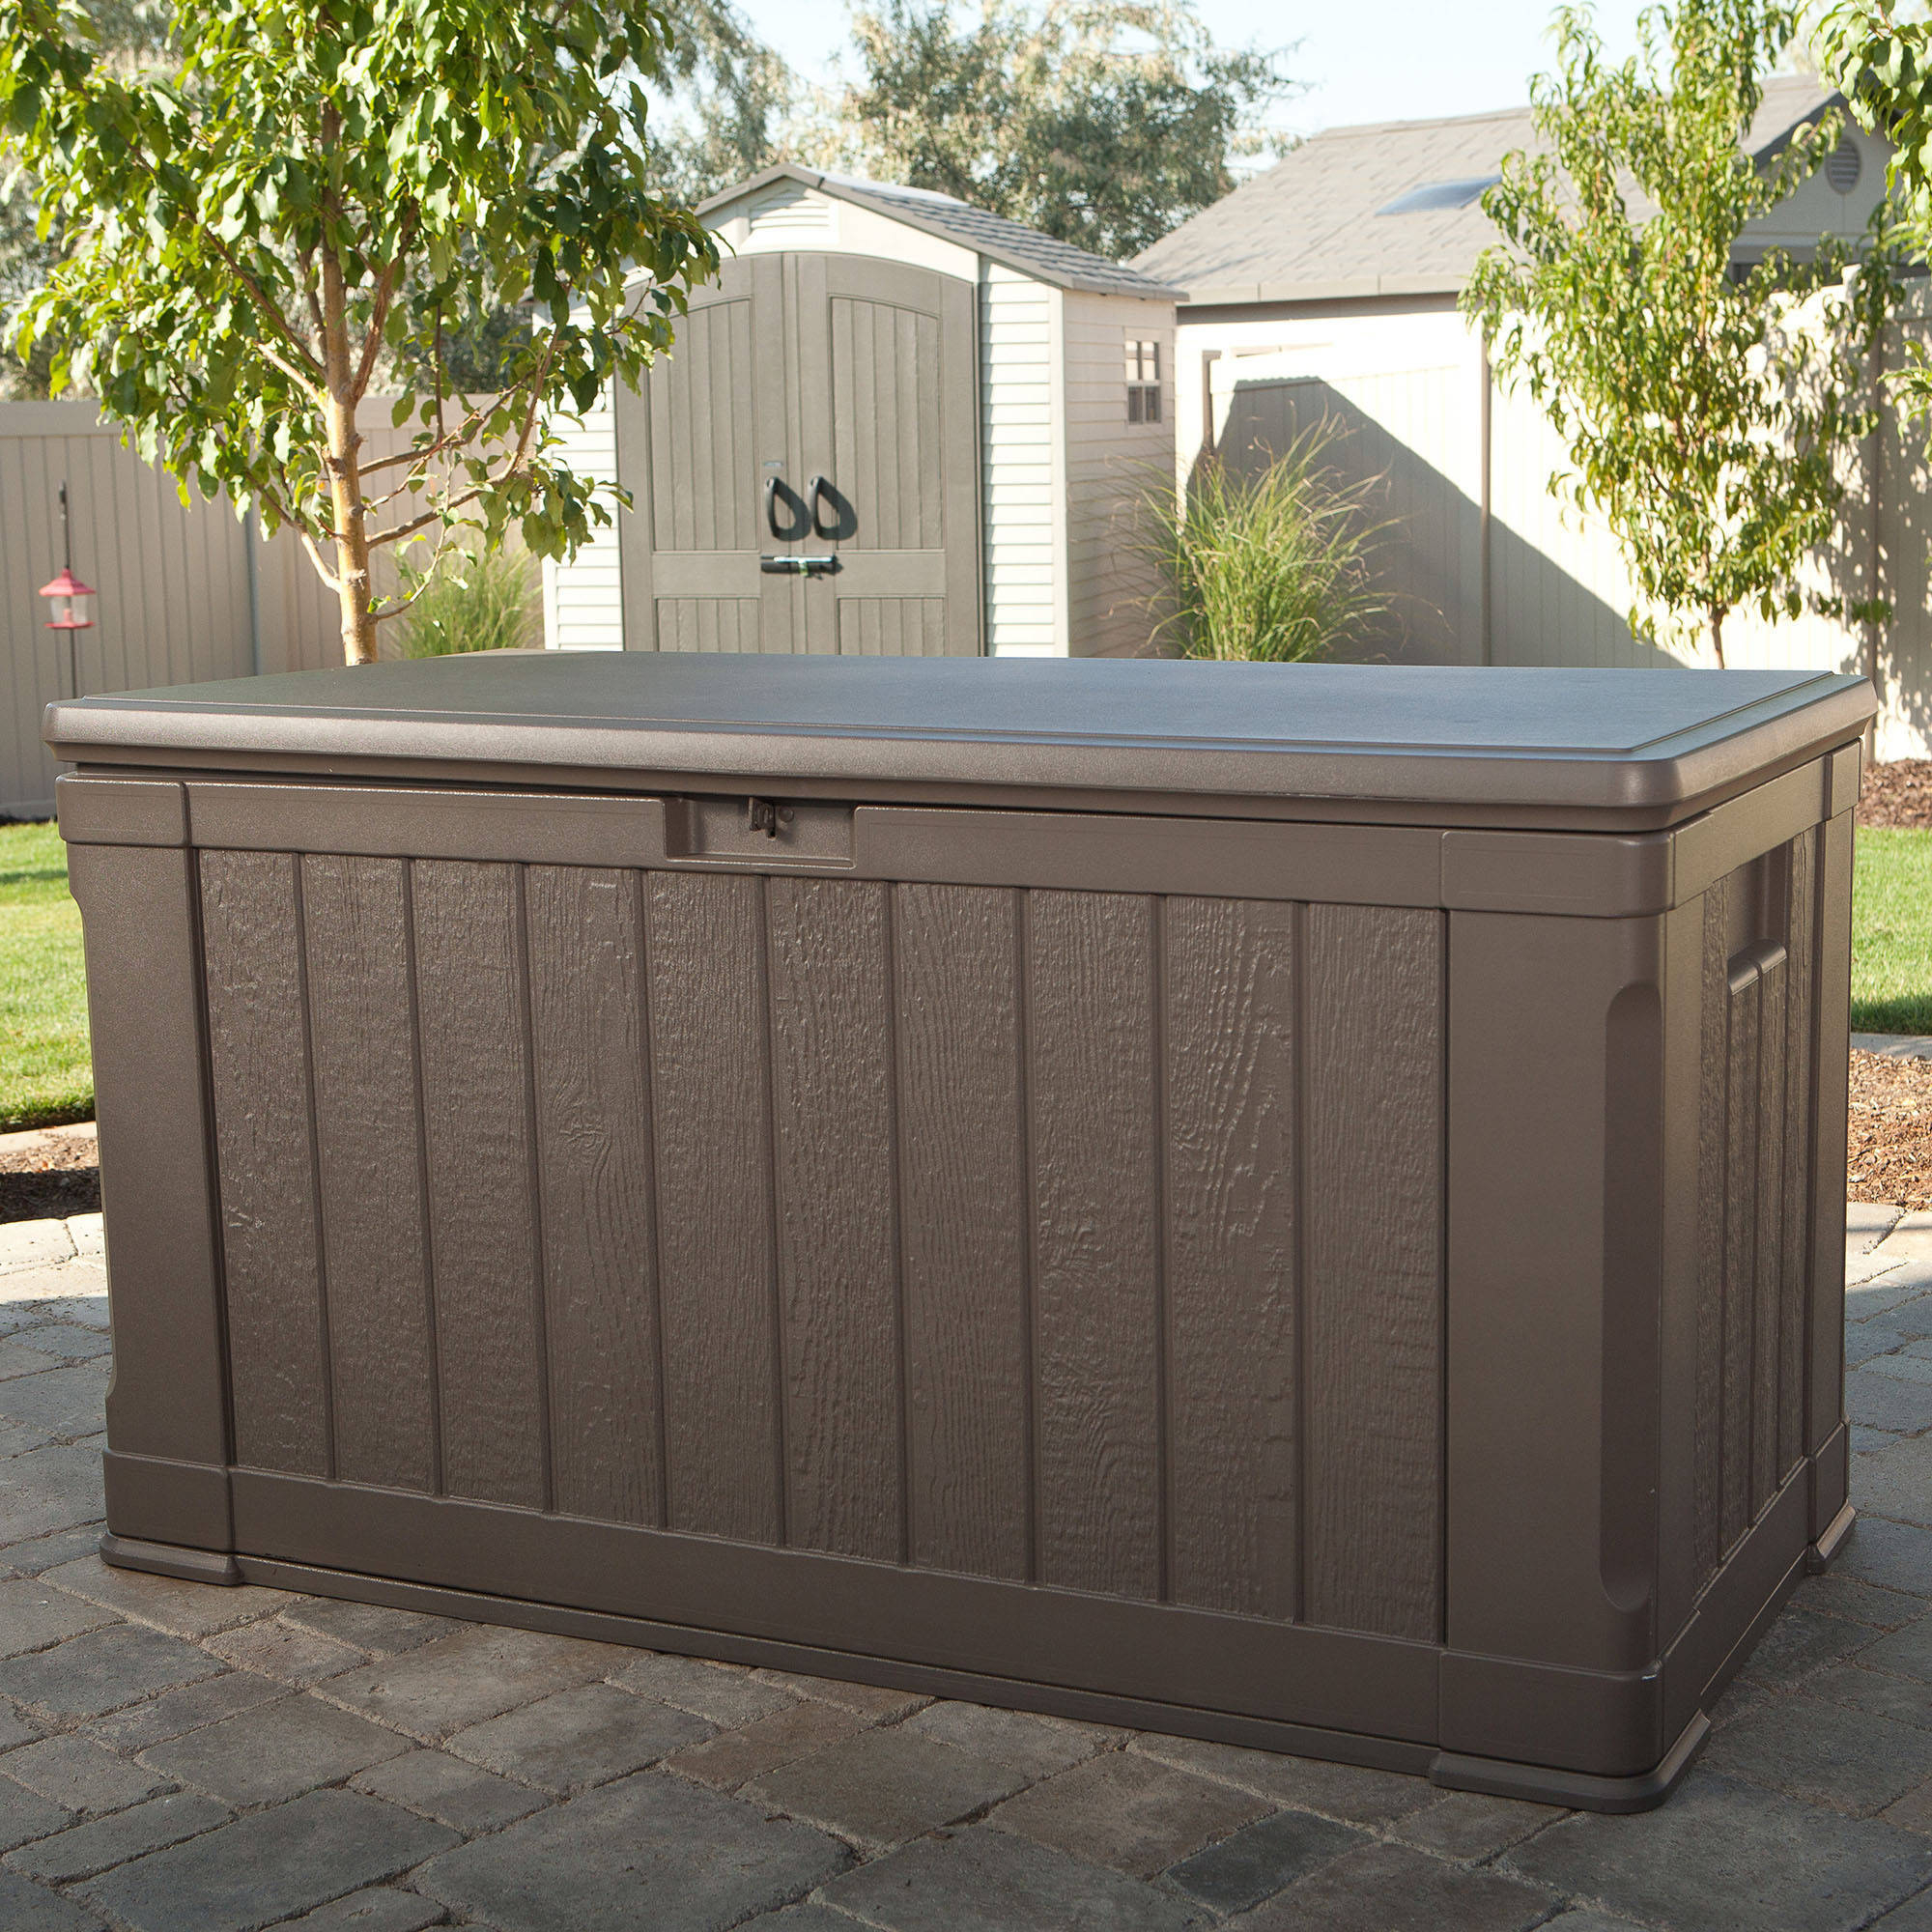 Lifetime Outdoor Storage Box 116 Gallon 60089 Walmart intended for measurements 2000 X 2000